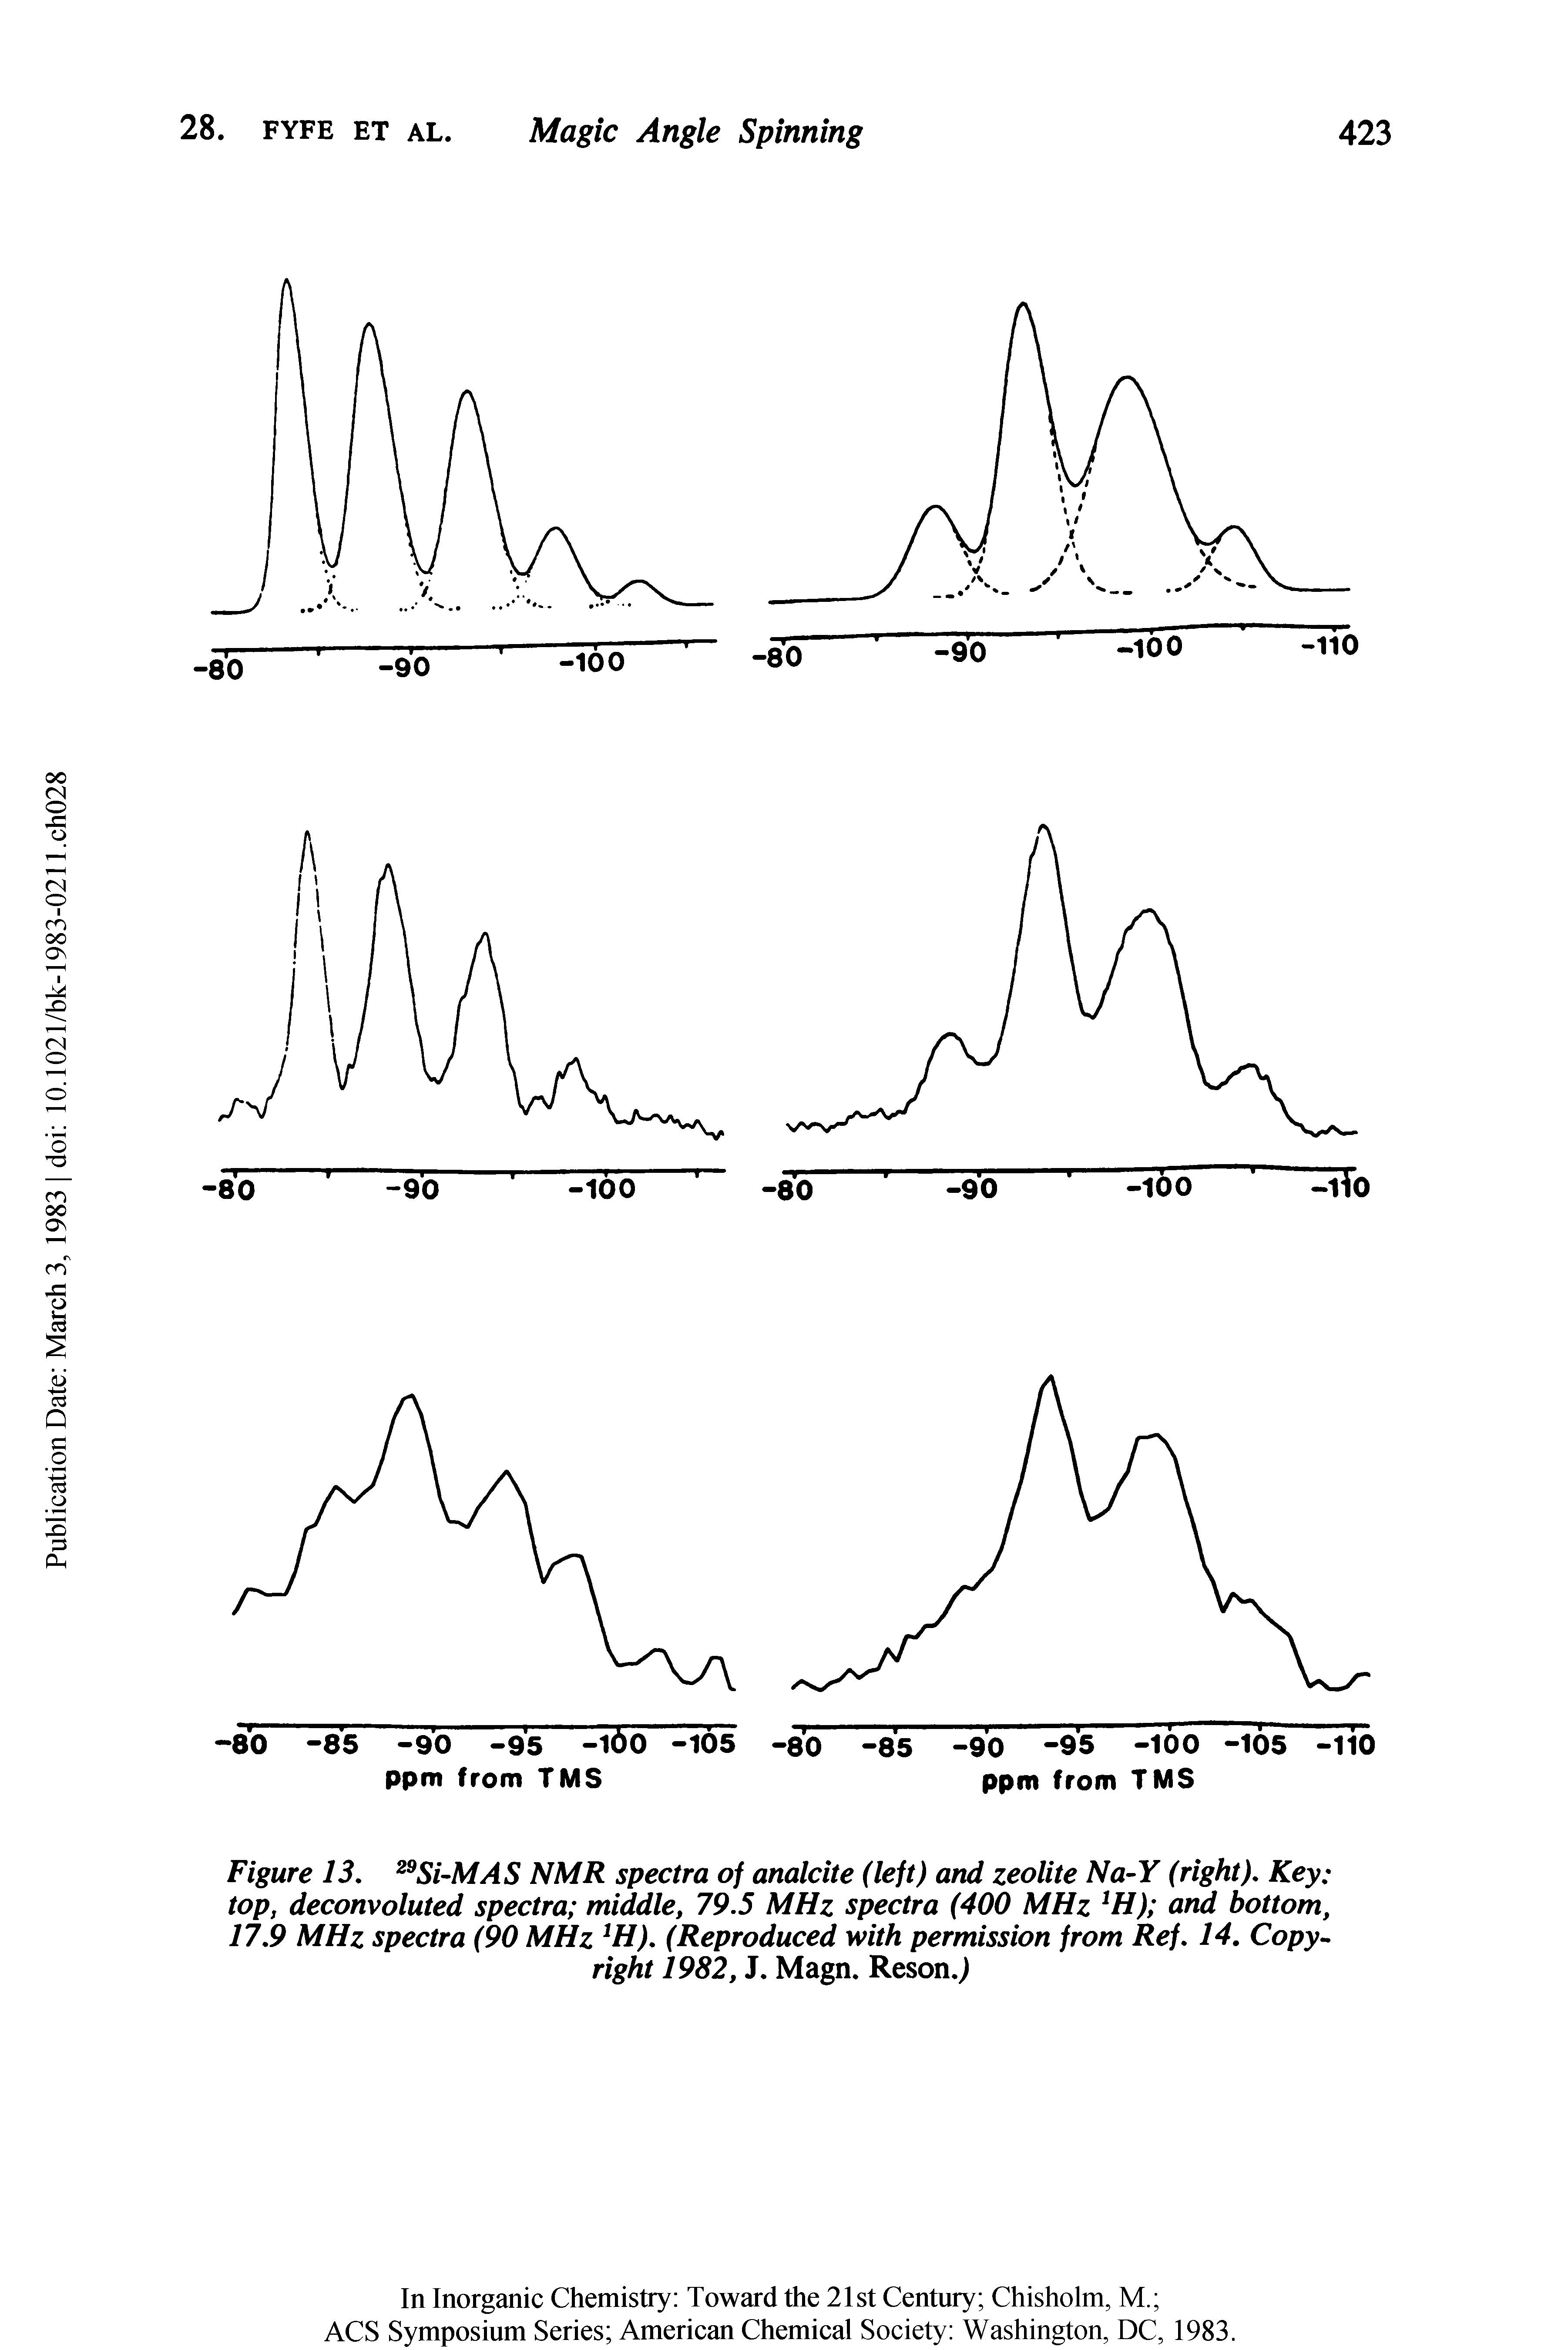 Figure 13. 29Si-MAS NMR spectra of analcite (left) and zeolite Na-Y (right). Key top, deconvolved spectra middle, 79.5 MHz spectra (400 MHz 1H) and bottom, 17.9 MHz spectra (90 MHz 1H). (Reproduced with permission from Ref. 14. Copyright 1982, J. Magn. ResonJ...